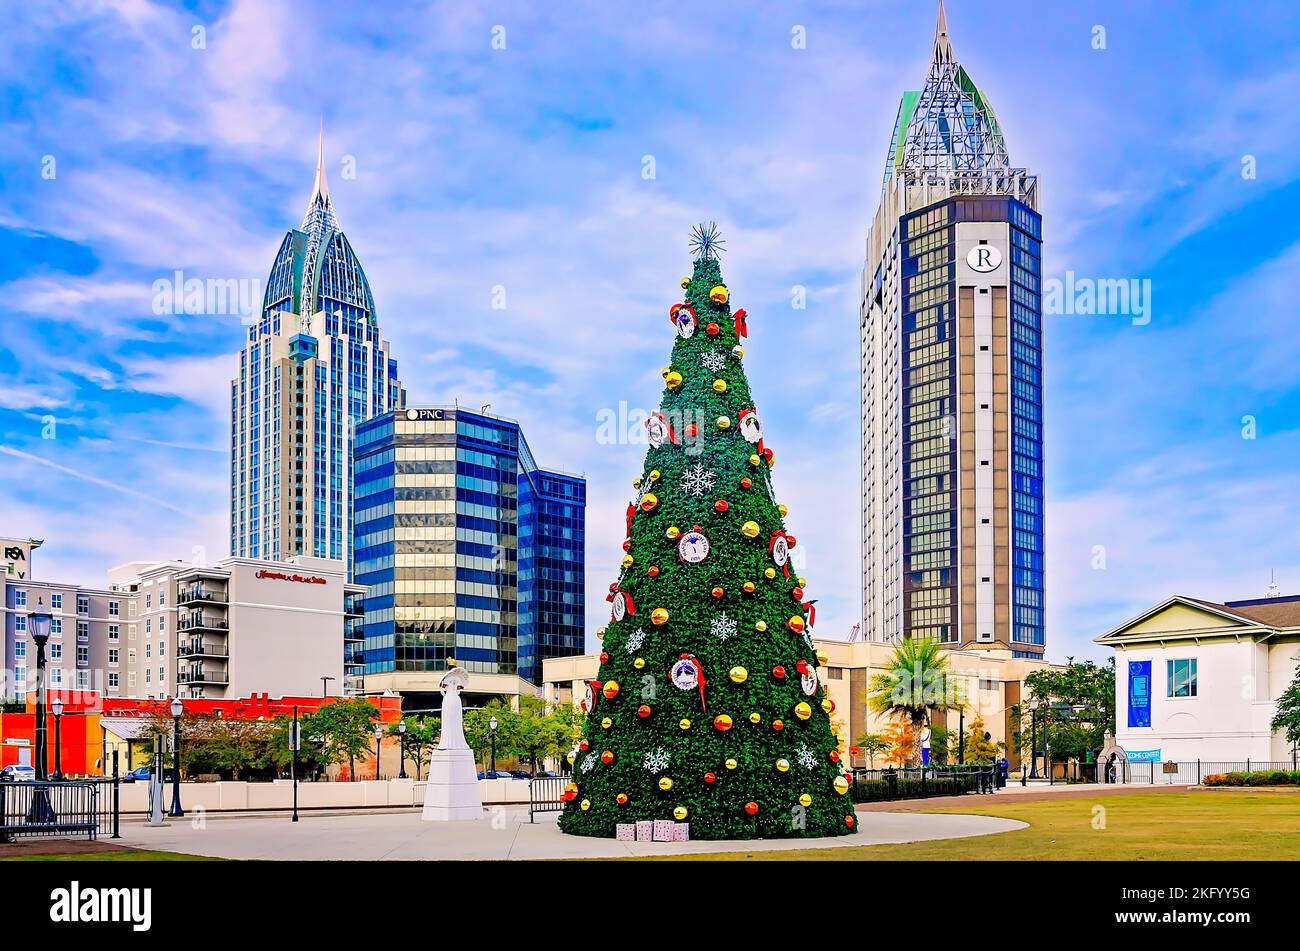 The city Christmas tree is displayed at Mardi Gras Park, Nov. 20, 2022, in Mobile, Alabama. Stock Photo